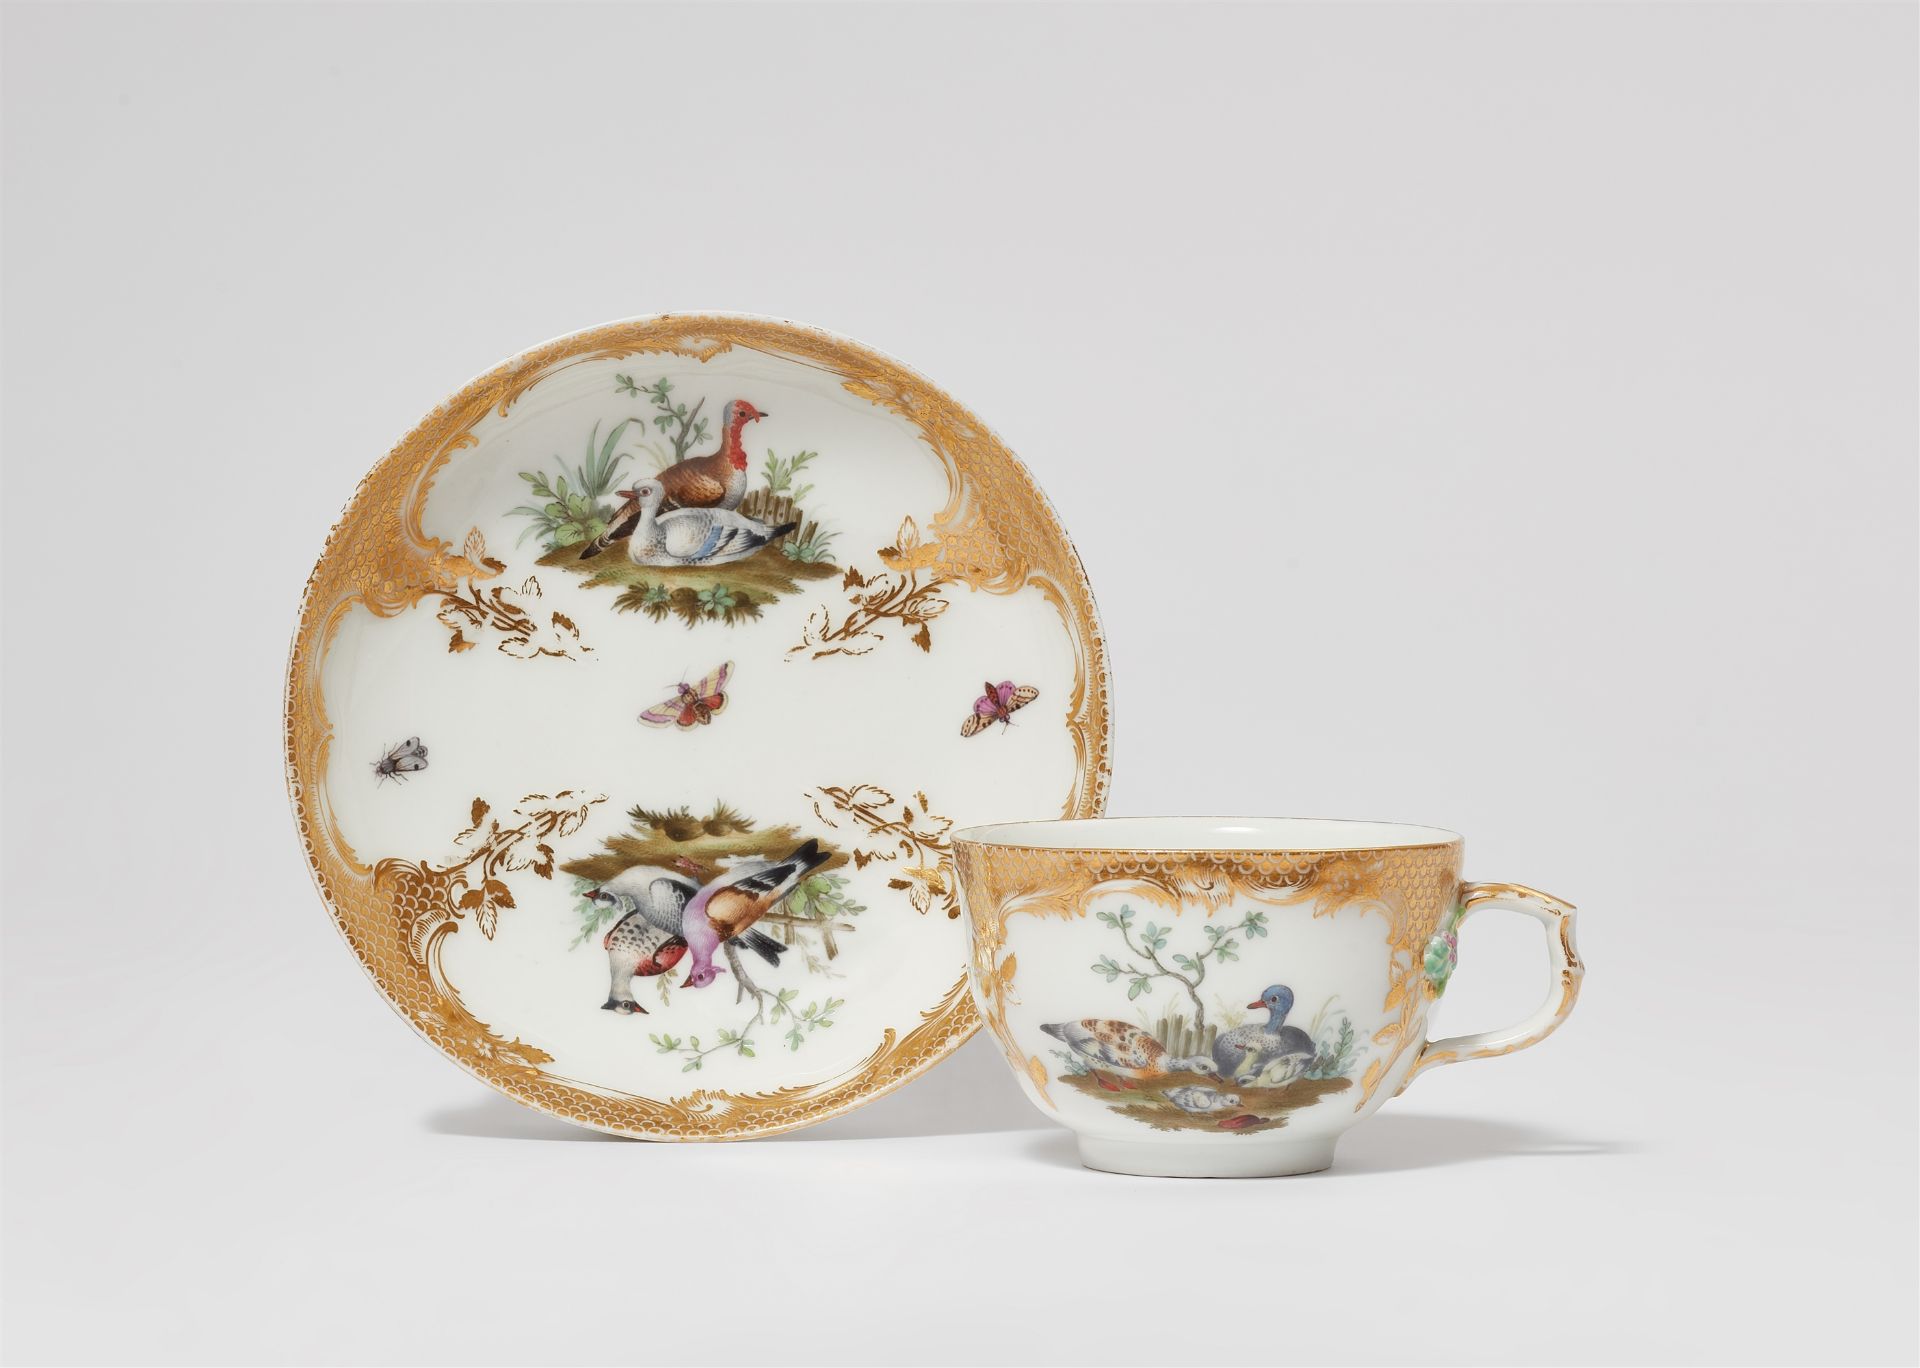 A Berlin KPM porcelain teacup and saucer from a service with gold scale pattern decor